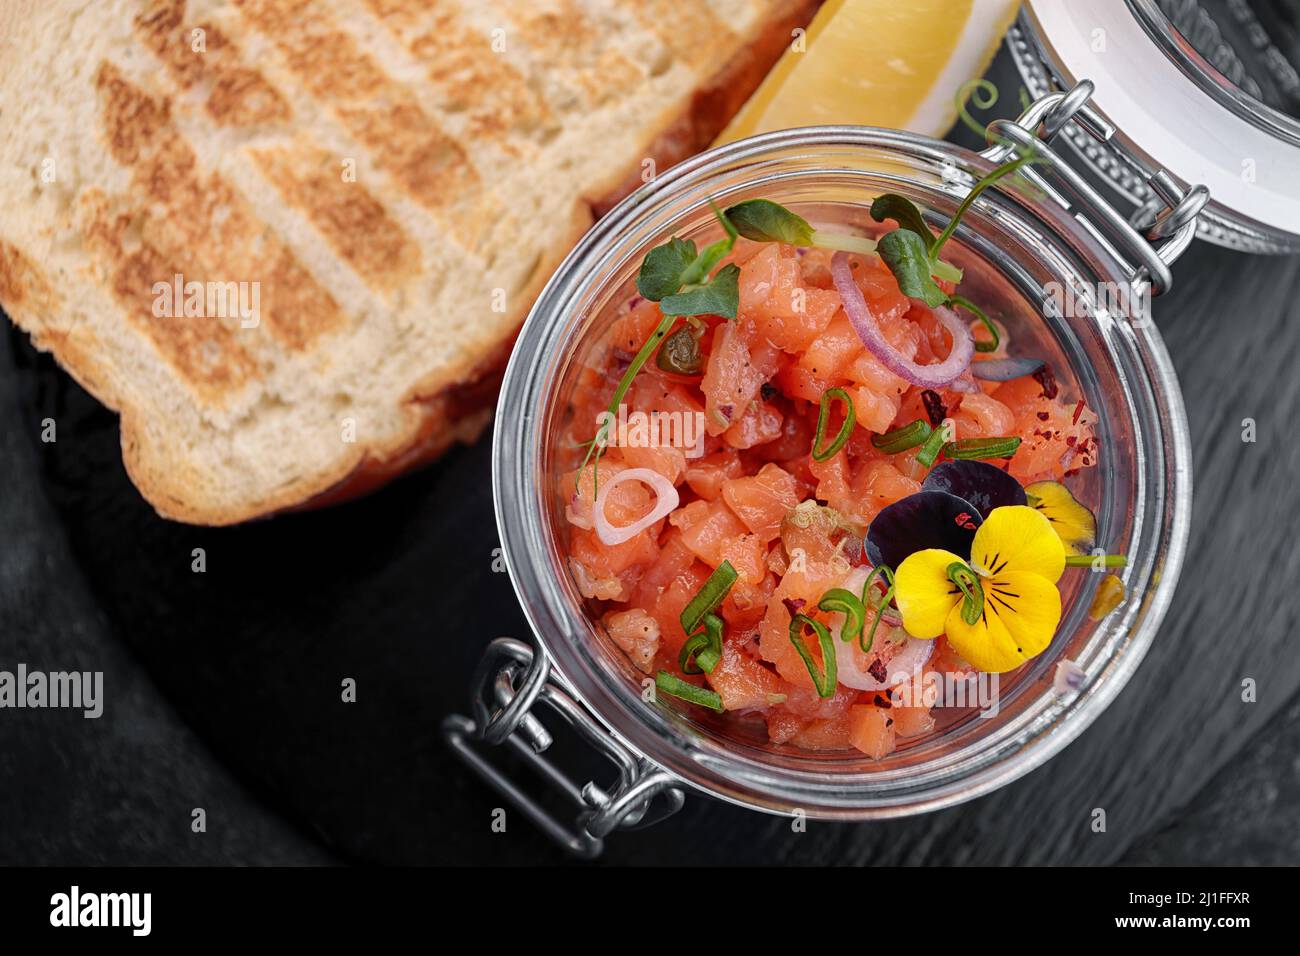 Salmon tartar with toast, in a glass jar, on a dark background Stock Photo